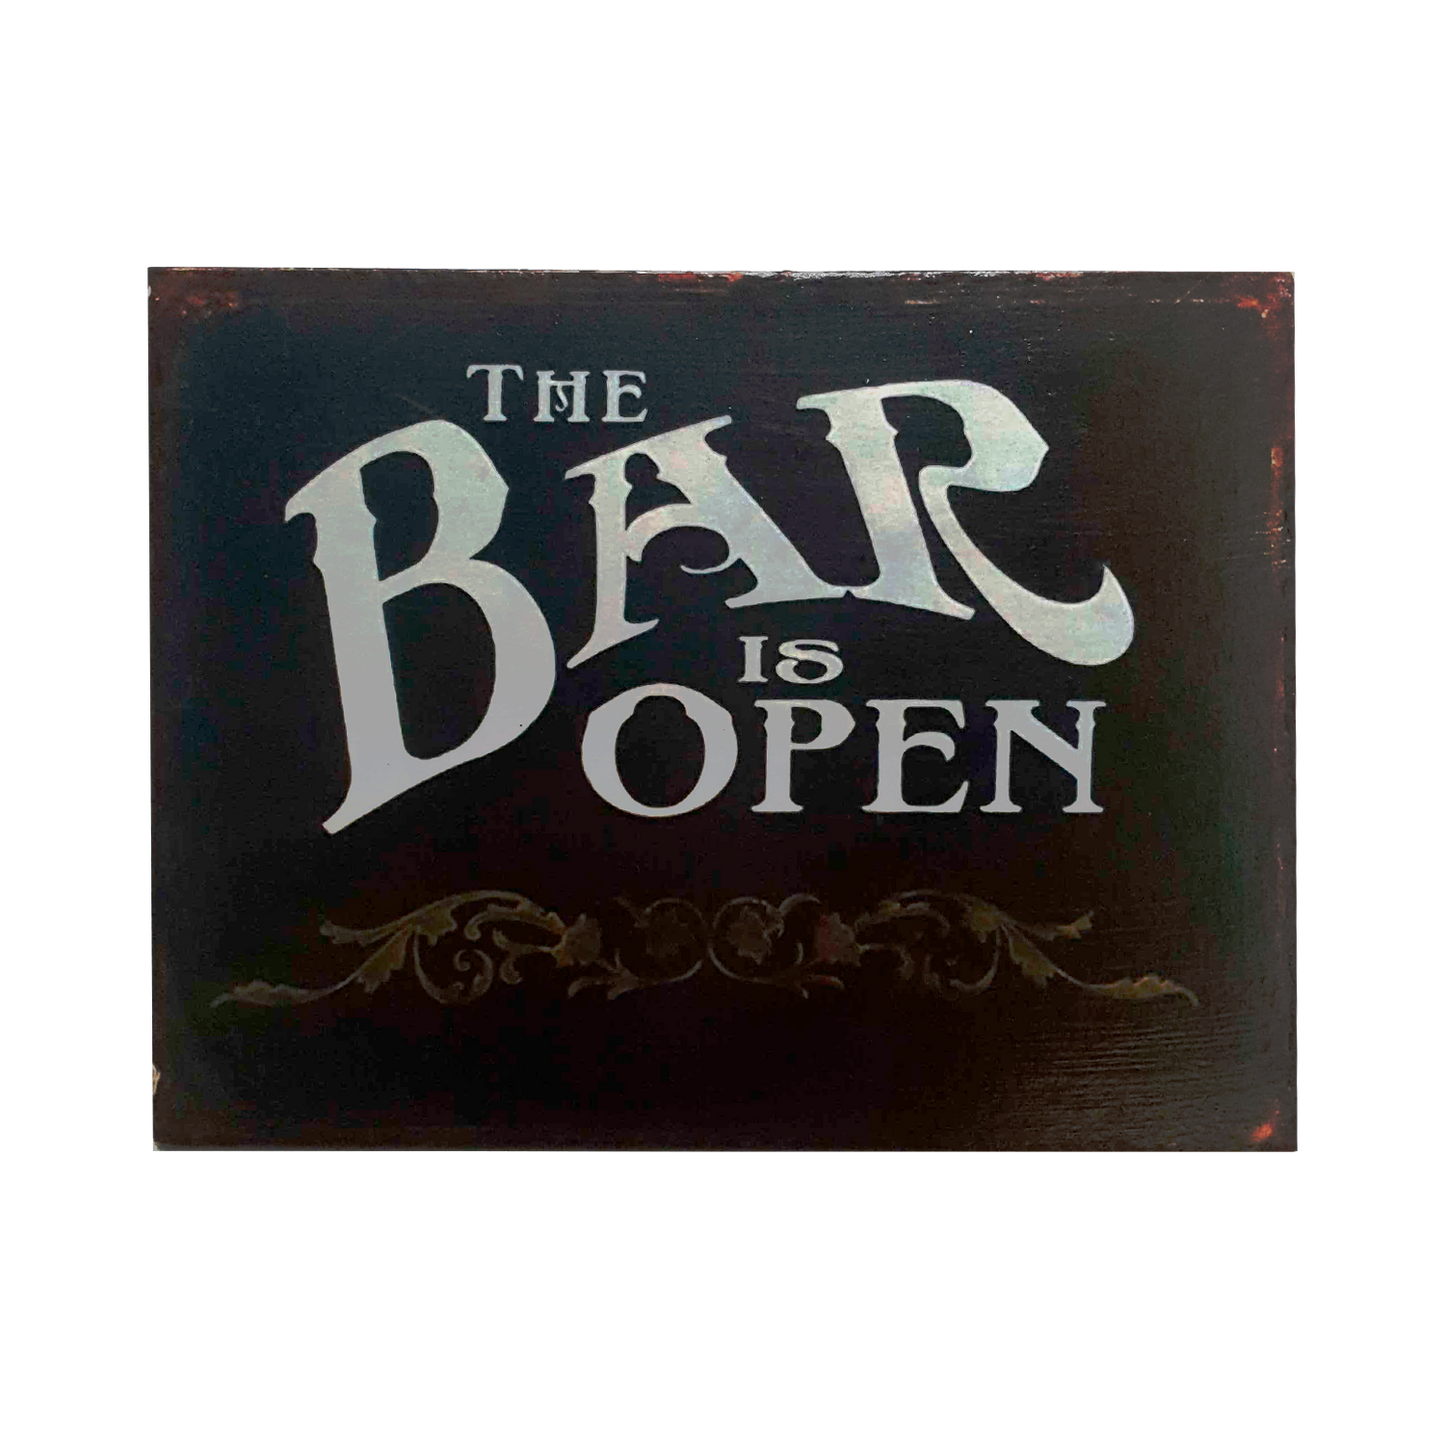 Afiche "The bar is open"